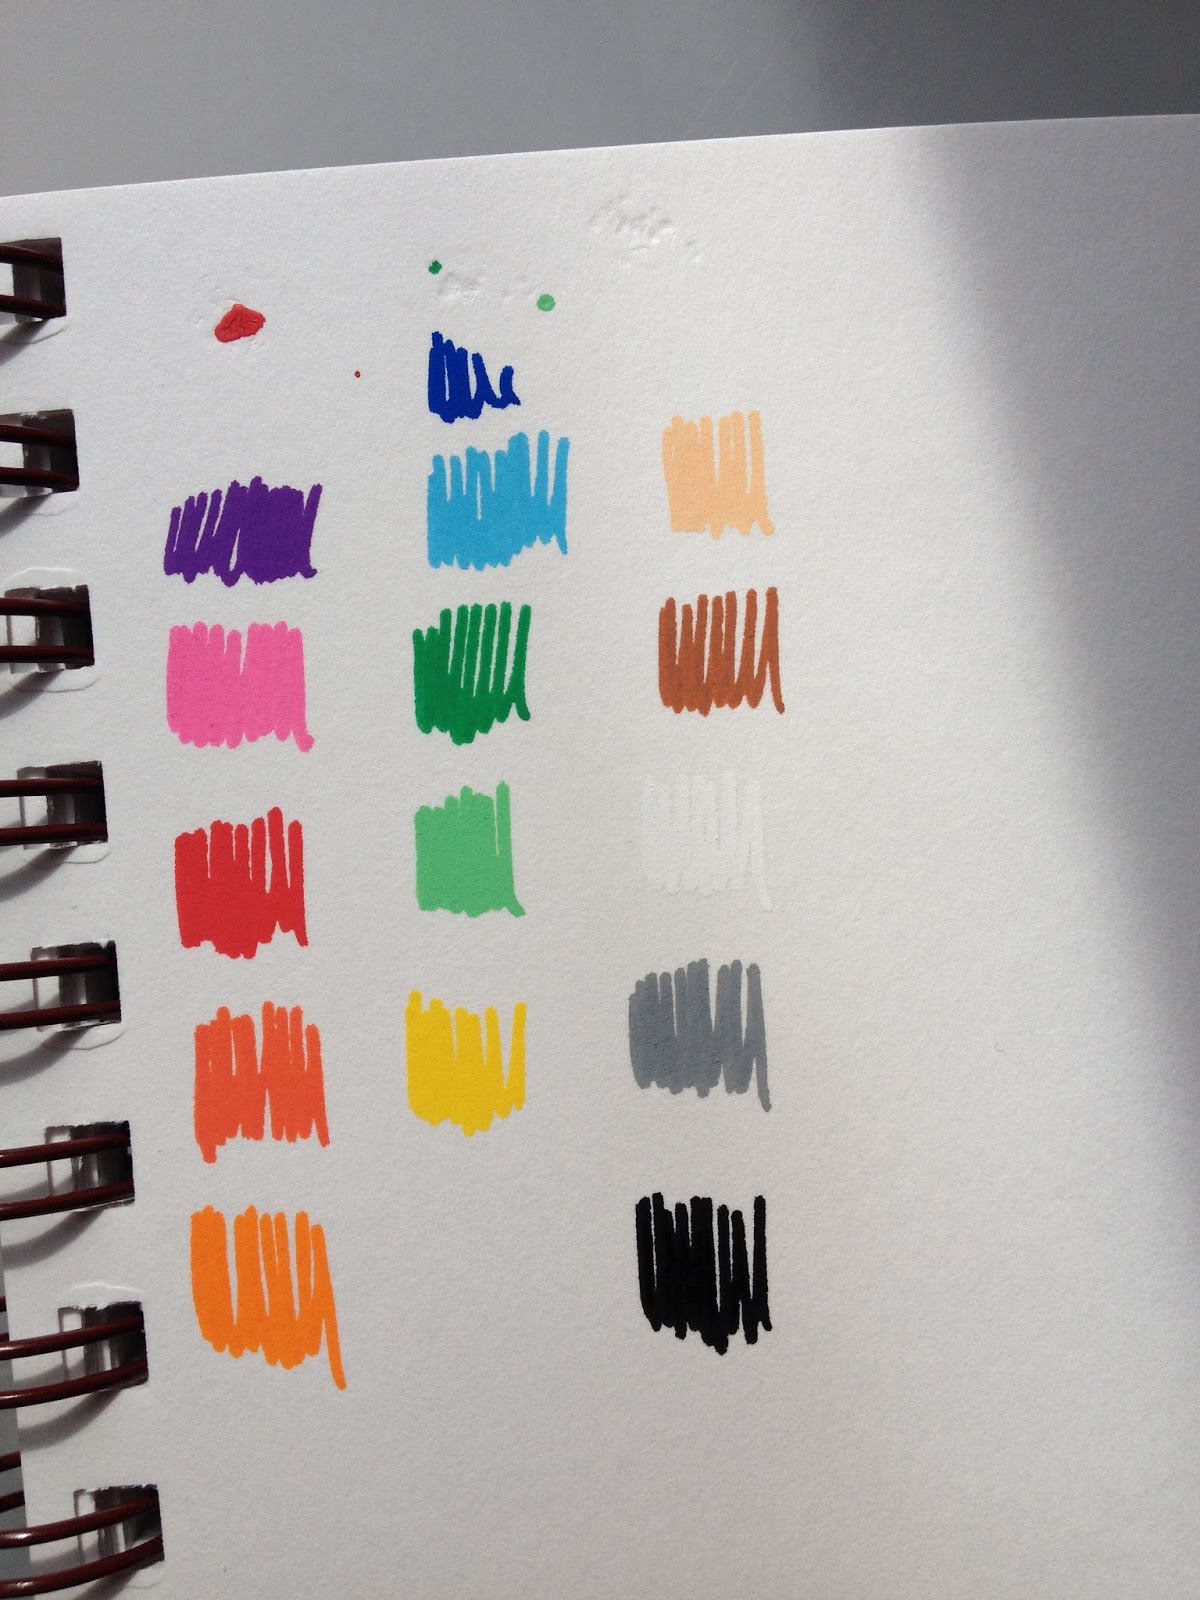 Paint Marker Review: POSCA Marker Review and Tutorial